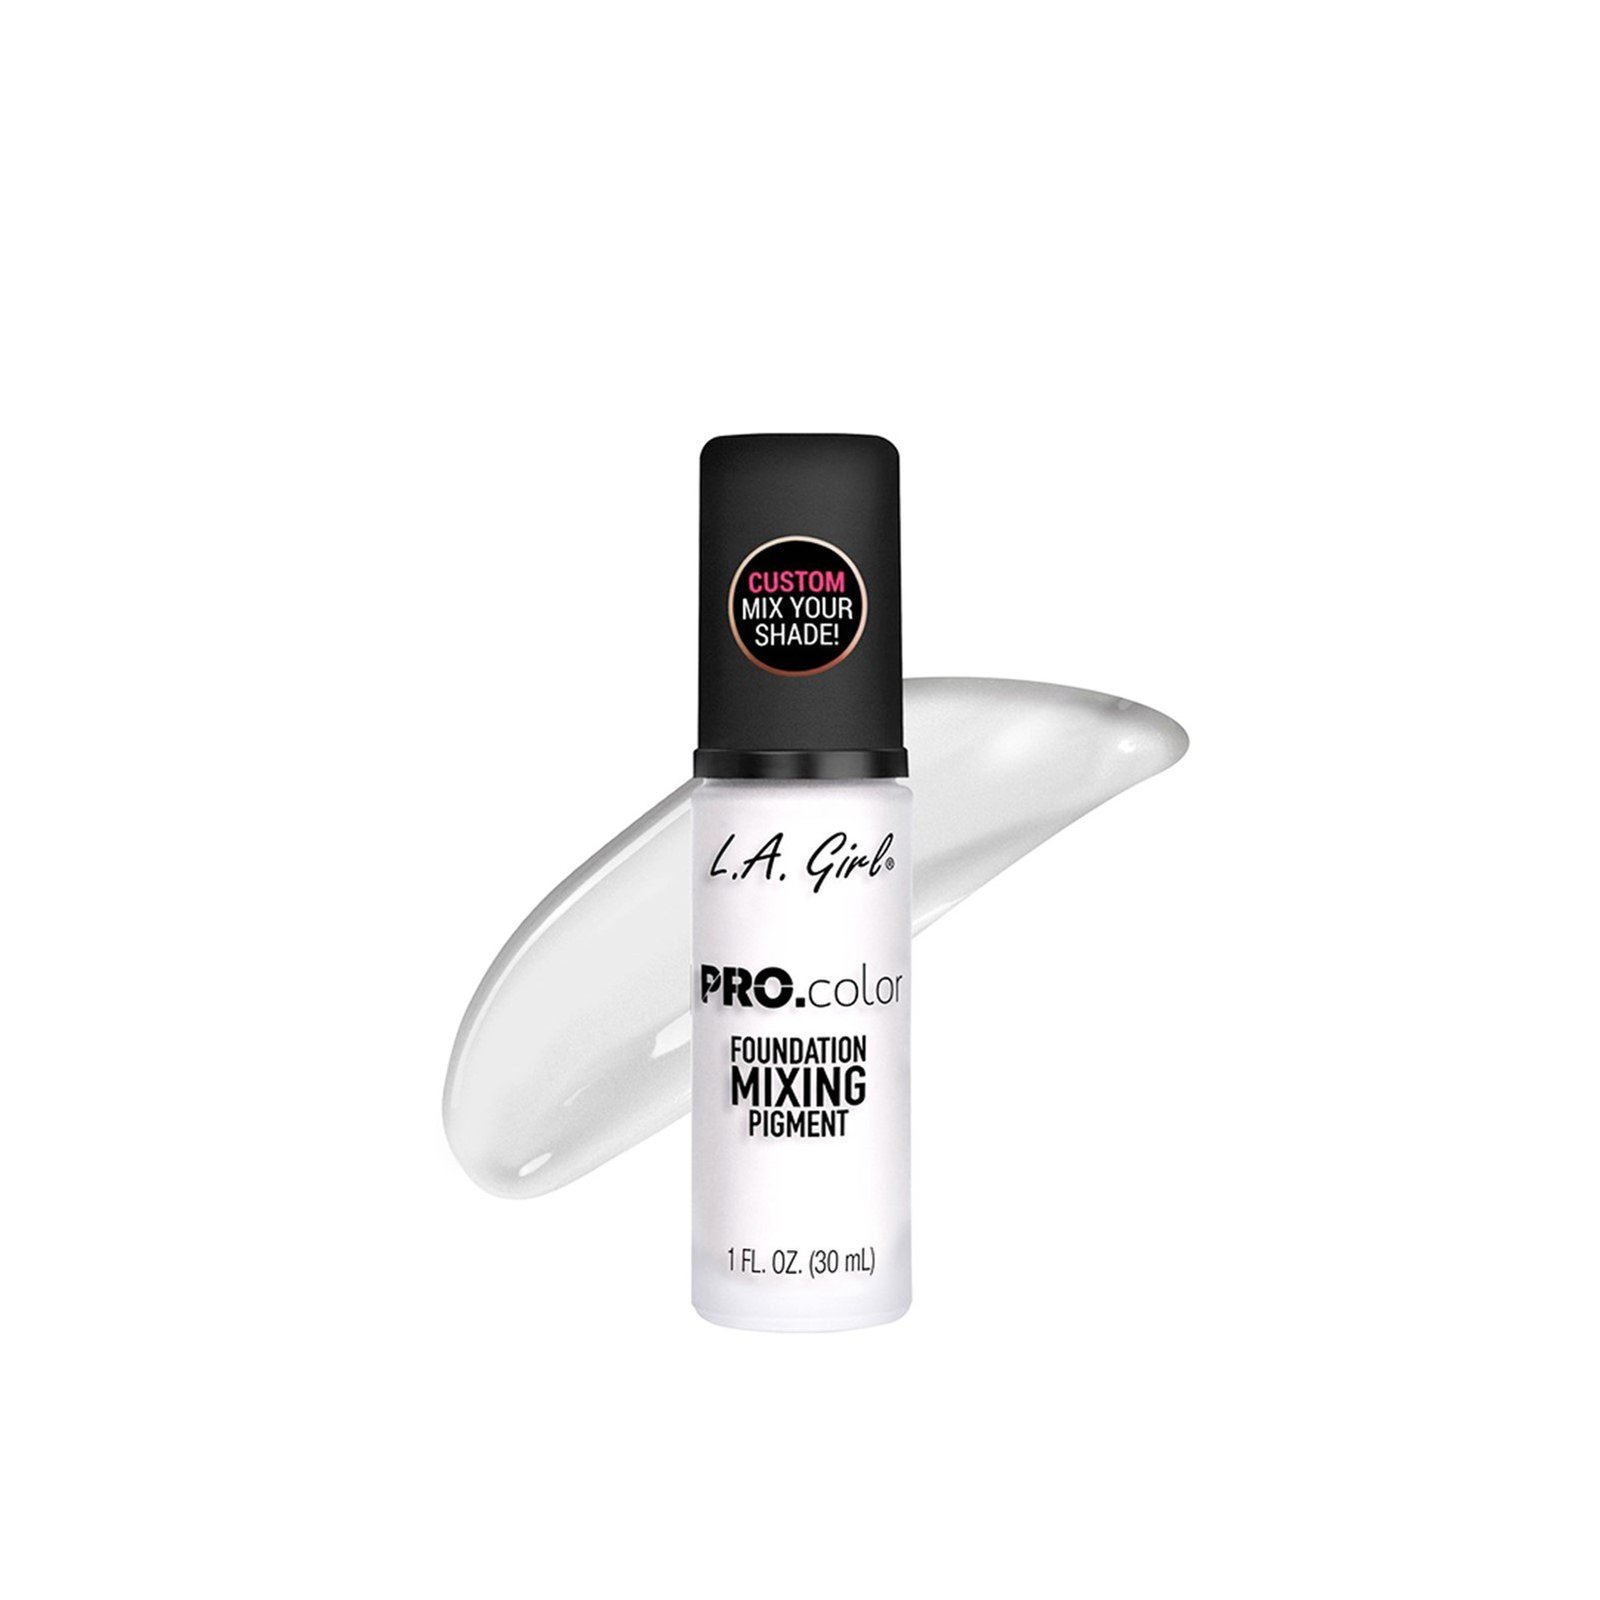 L.A. Girl Pro Color Foundation Mixing Pigment White 30ml